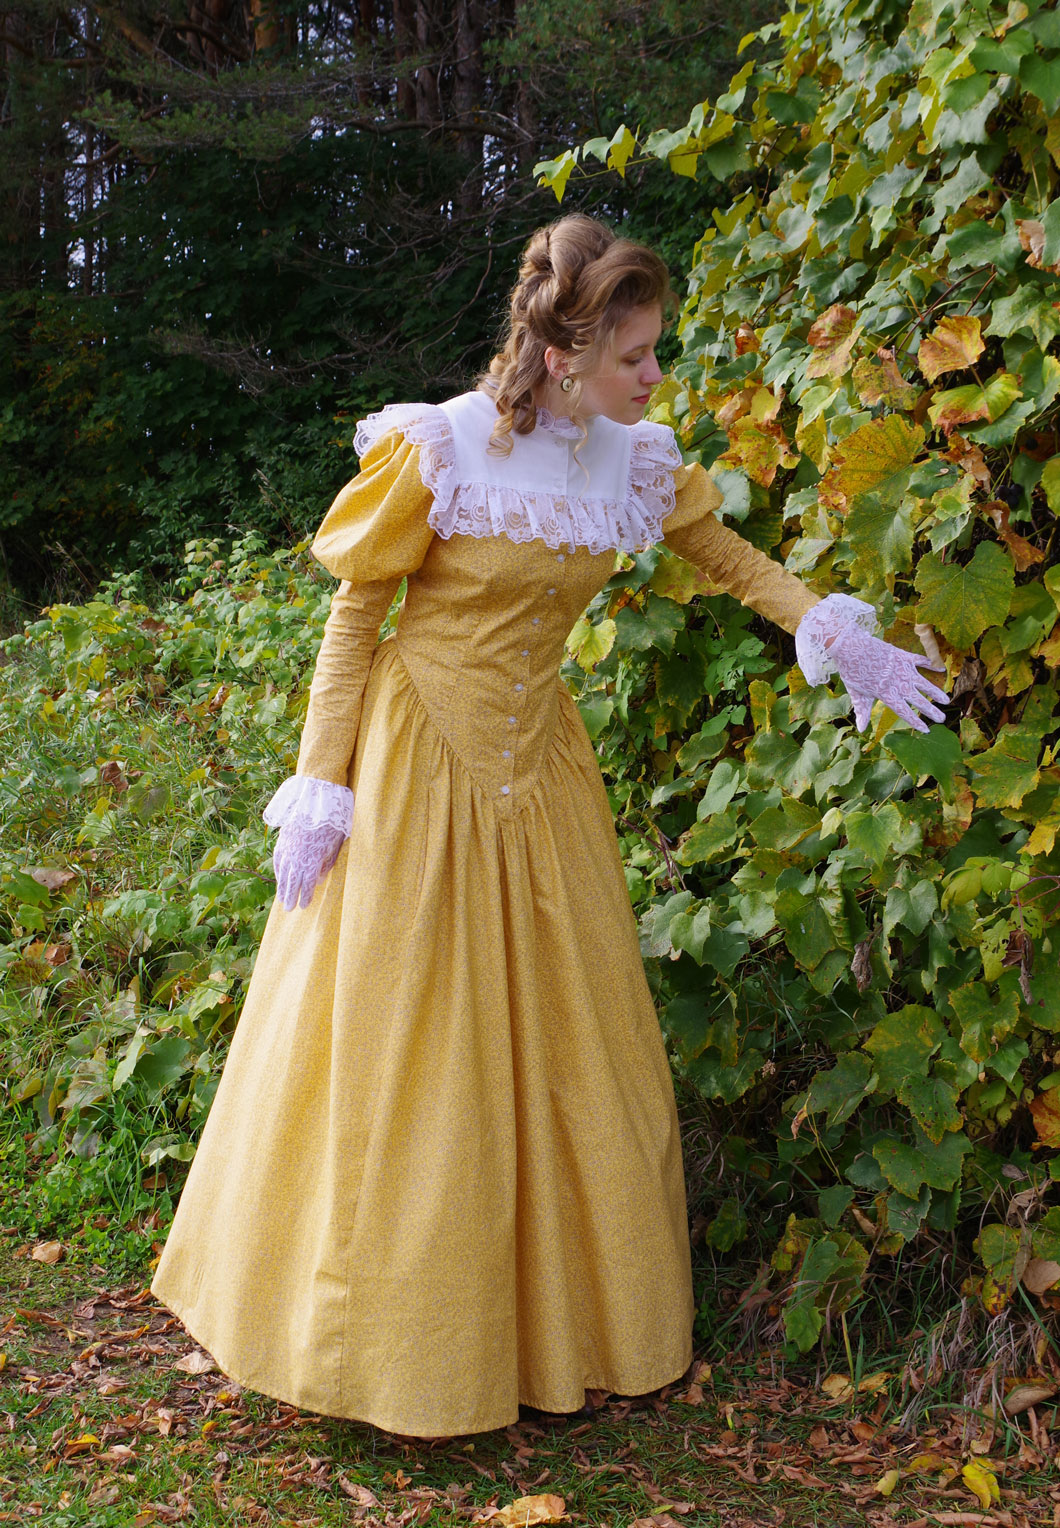 Yellow Victorian Gown